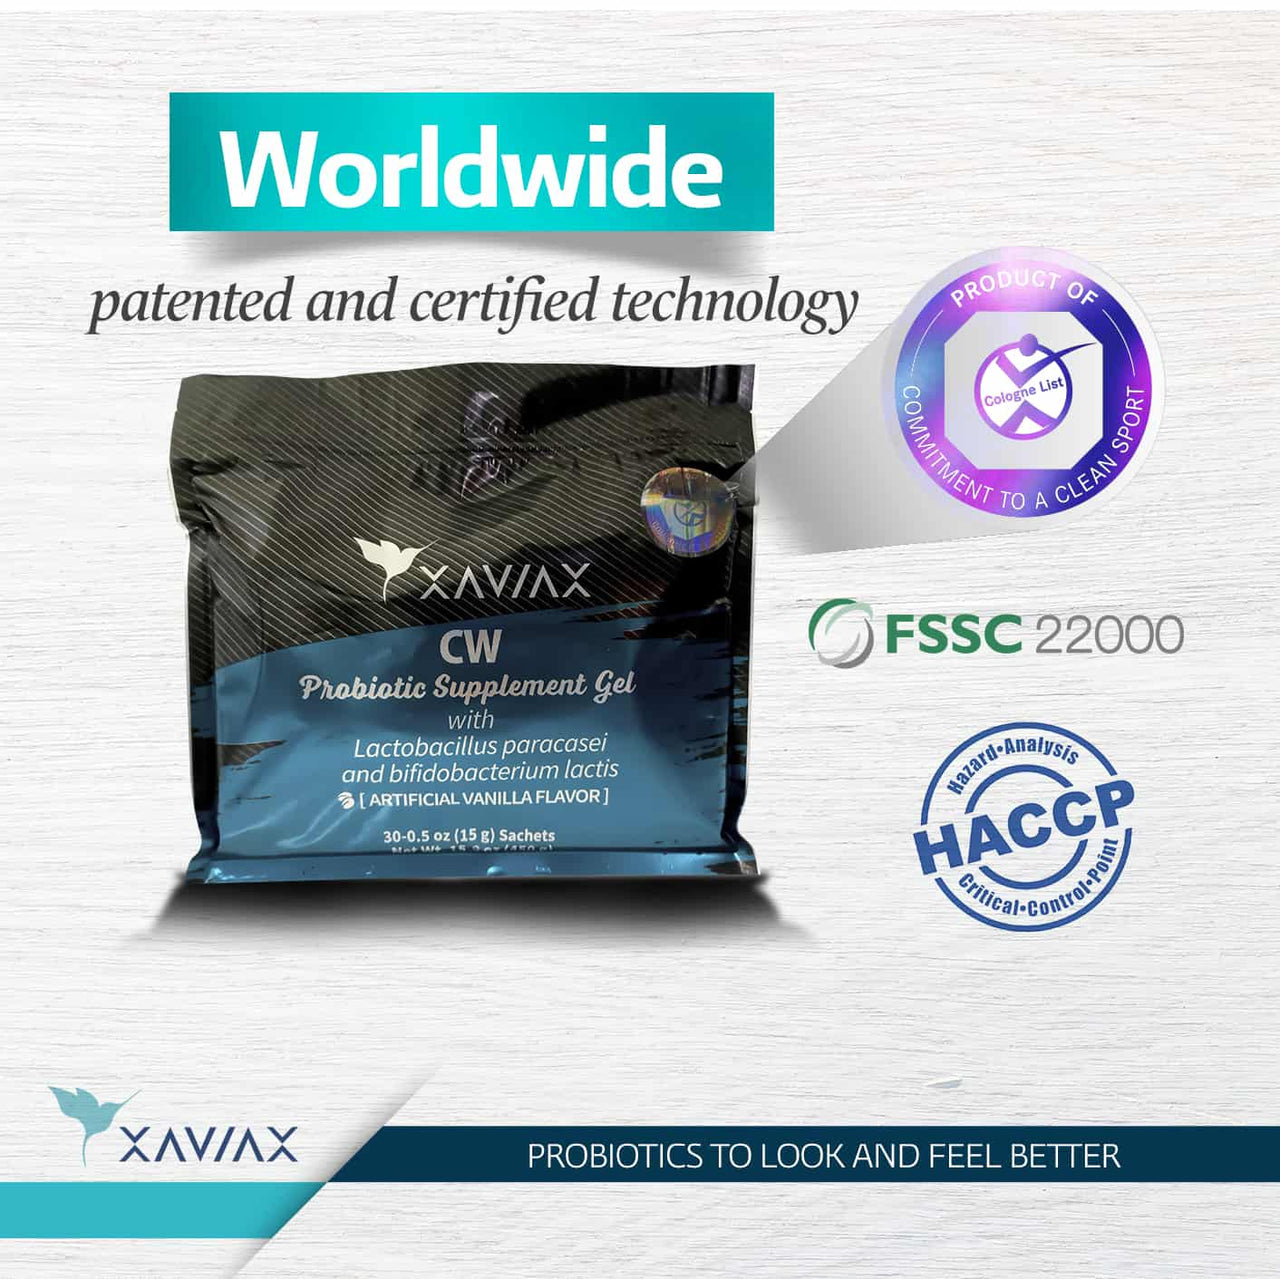 cw certified and patented technology in probiotics